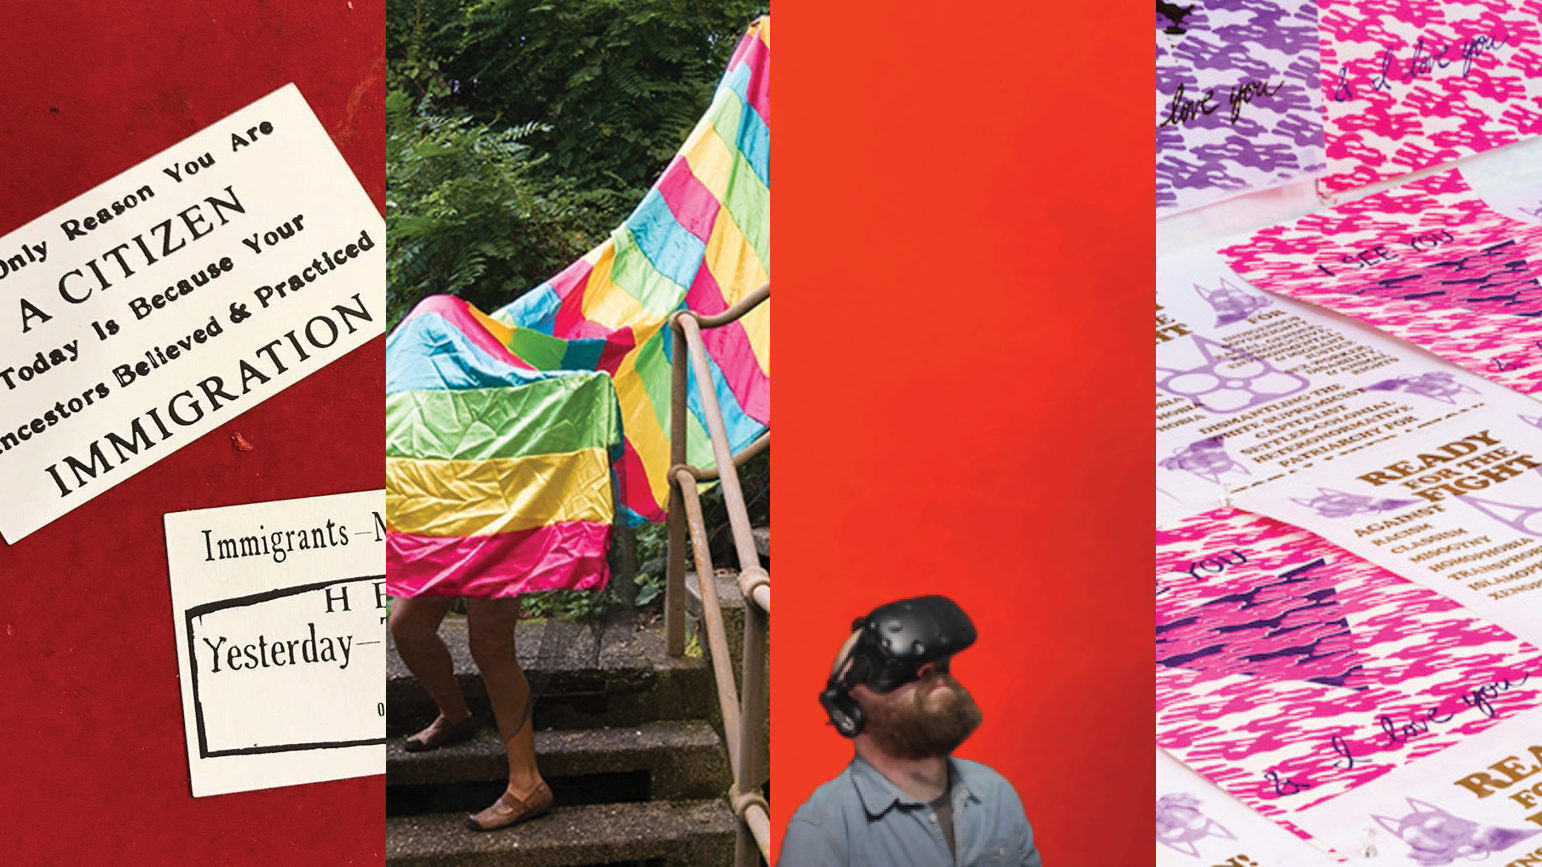 Four images: 1) two business cards against a red background; 2) two figures performing on outdoor steps under rainbow fabric; 3) Man with a VR headset looking up; 4) image of an assortment of pink and purple prints